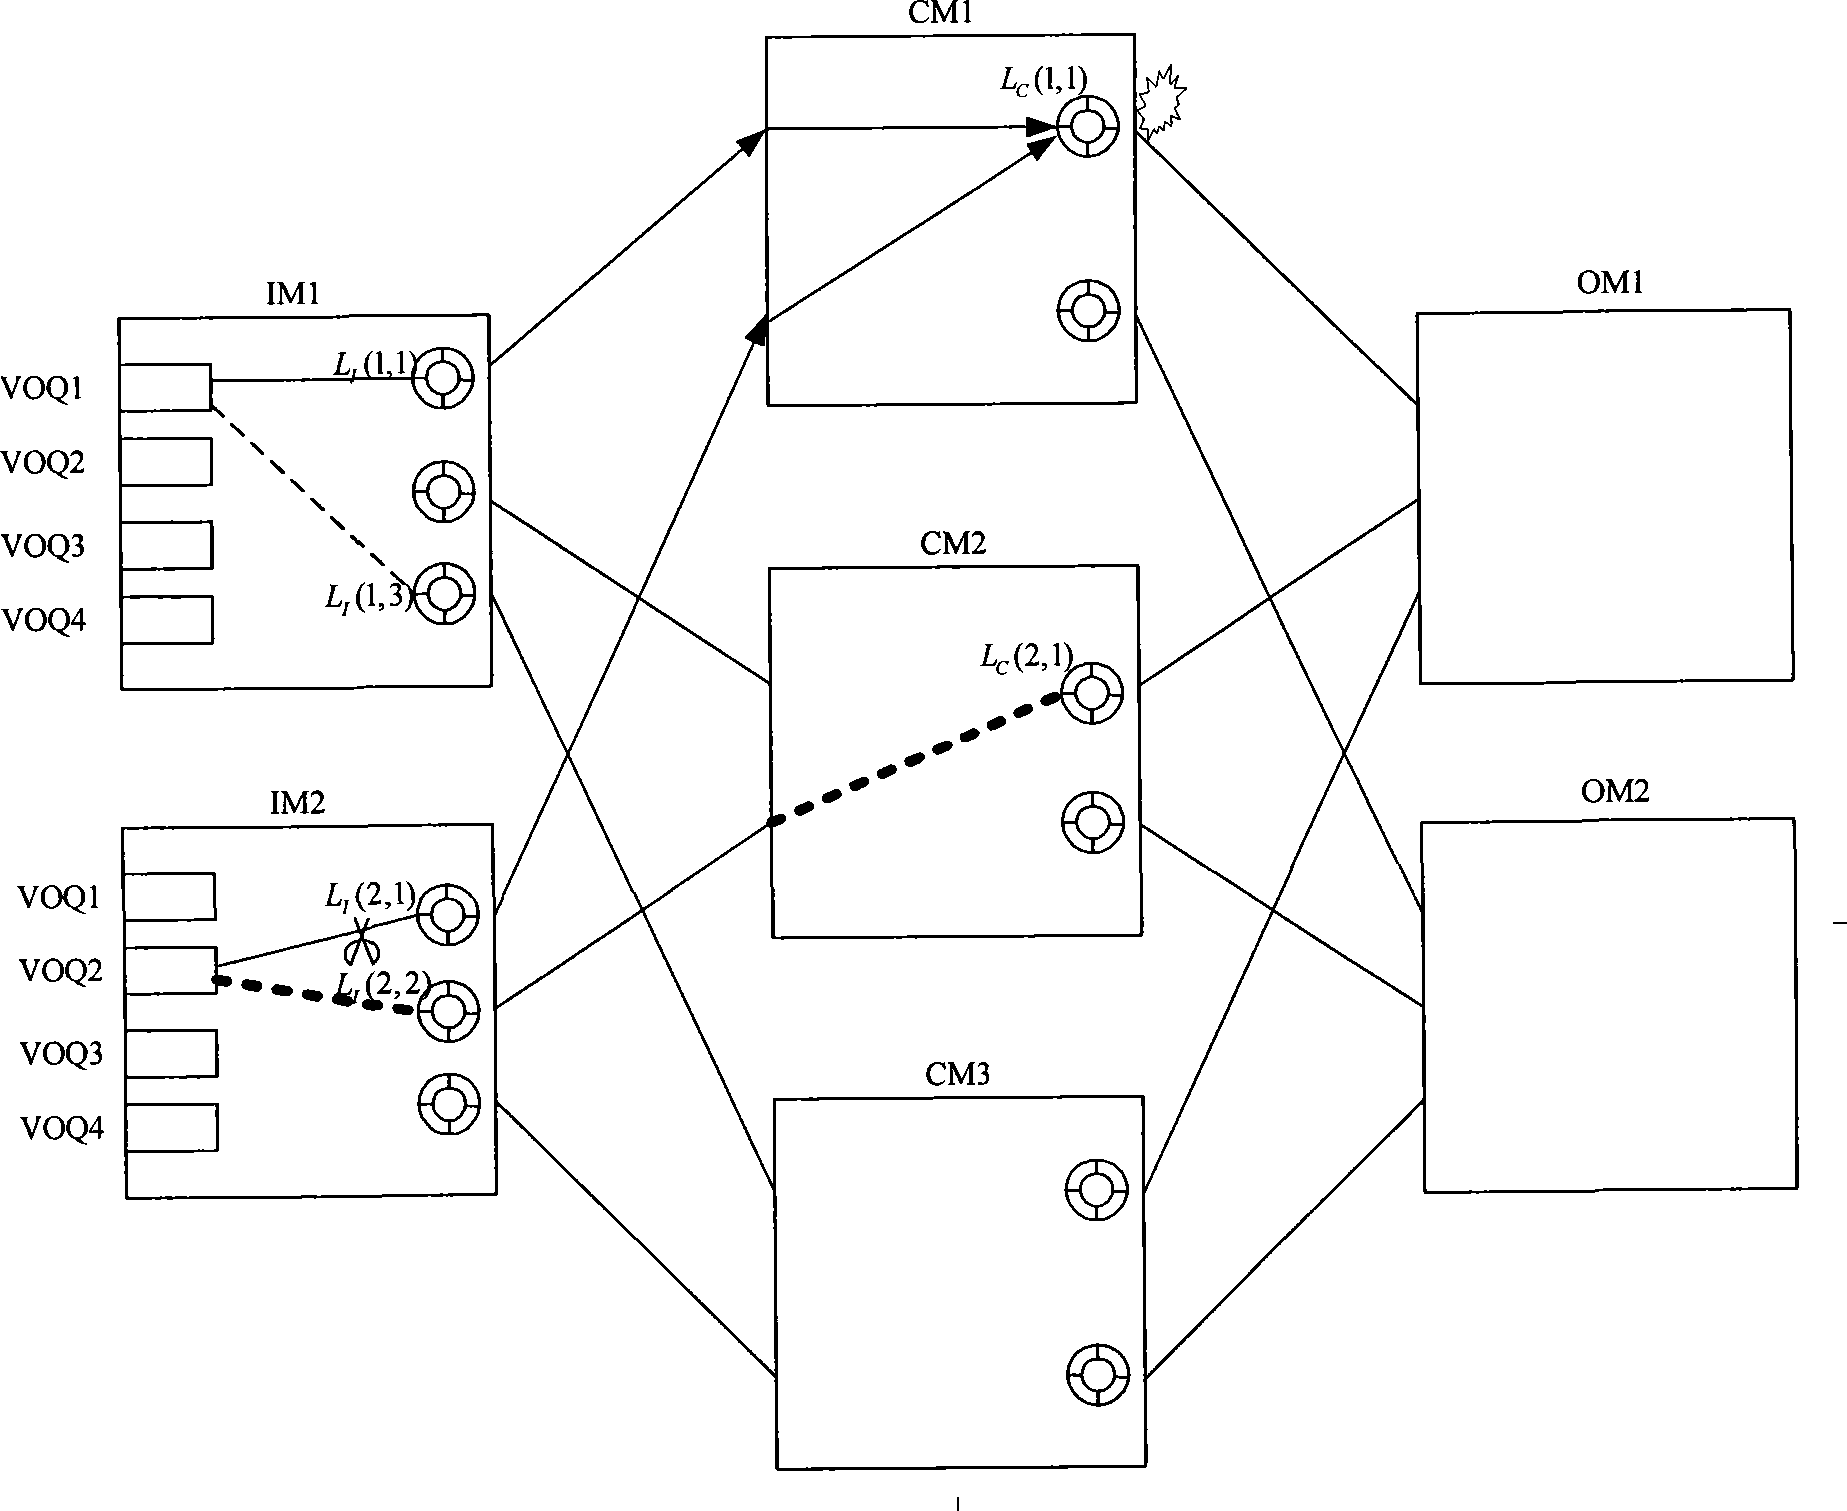 Sequence matching scheduling algorithm based on Clos network switching structure